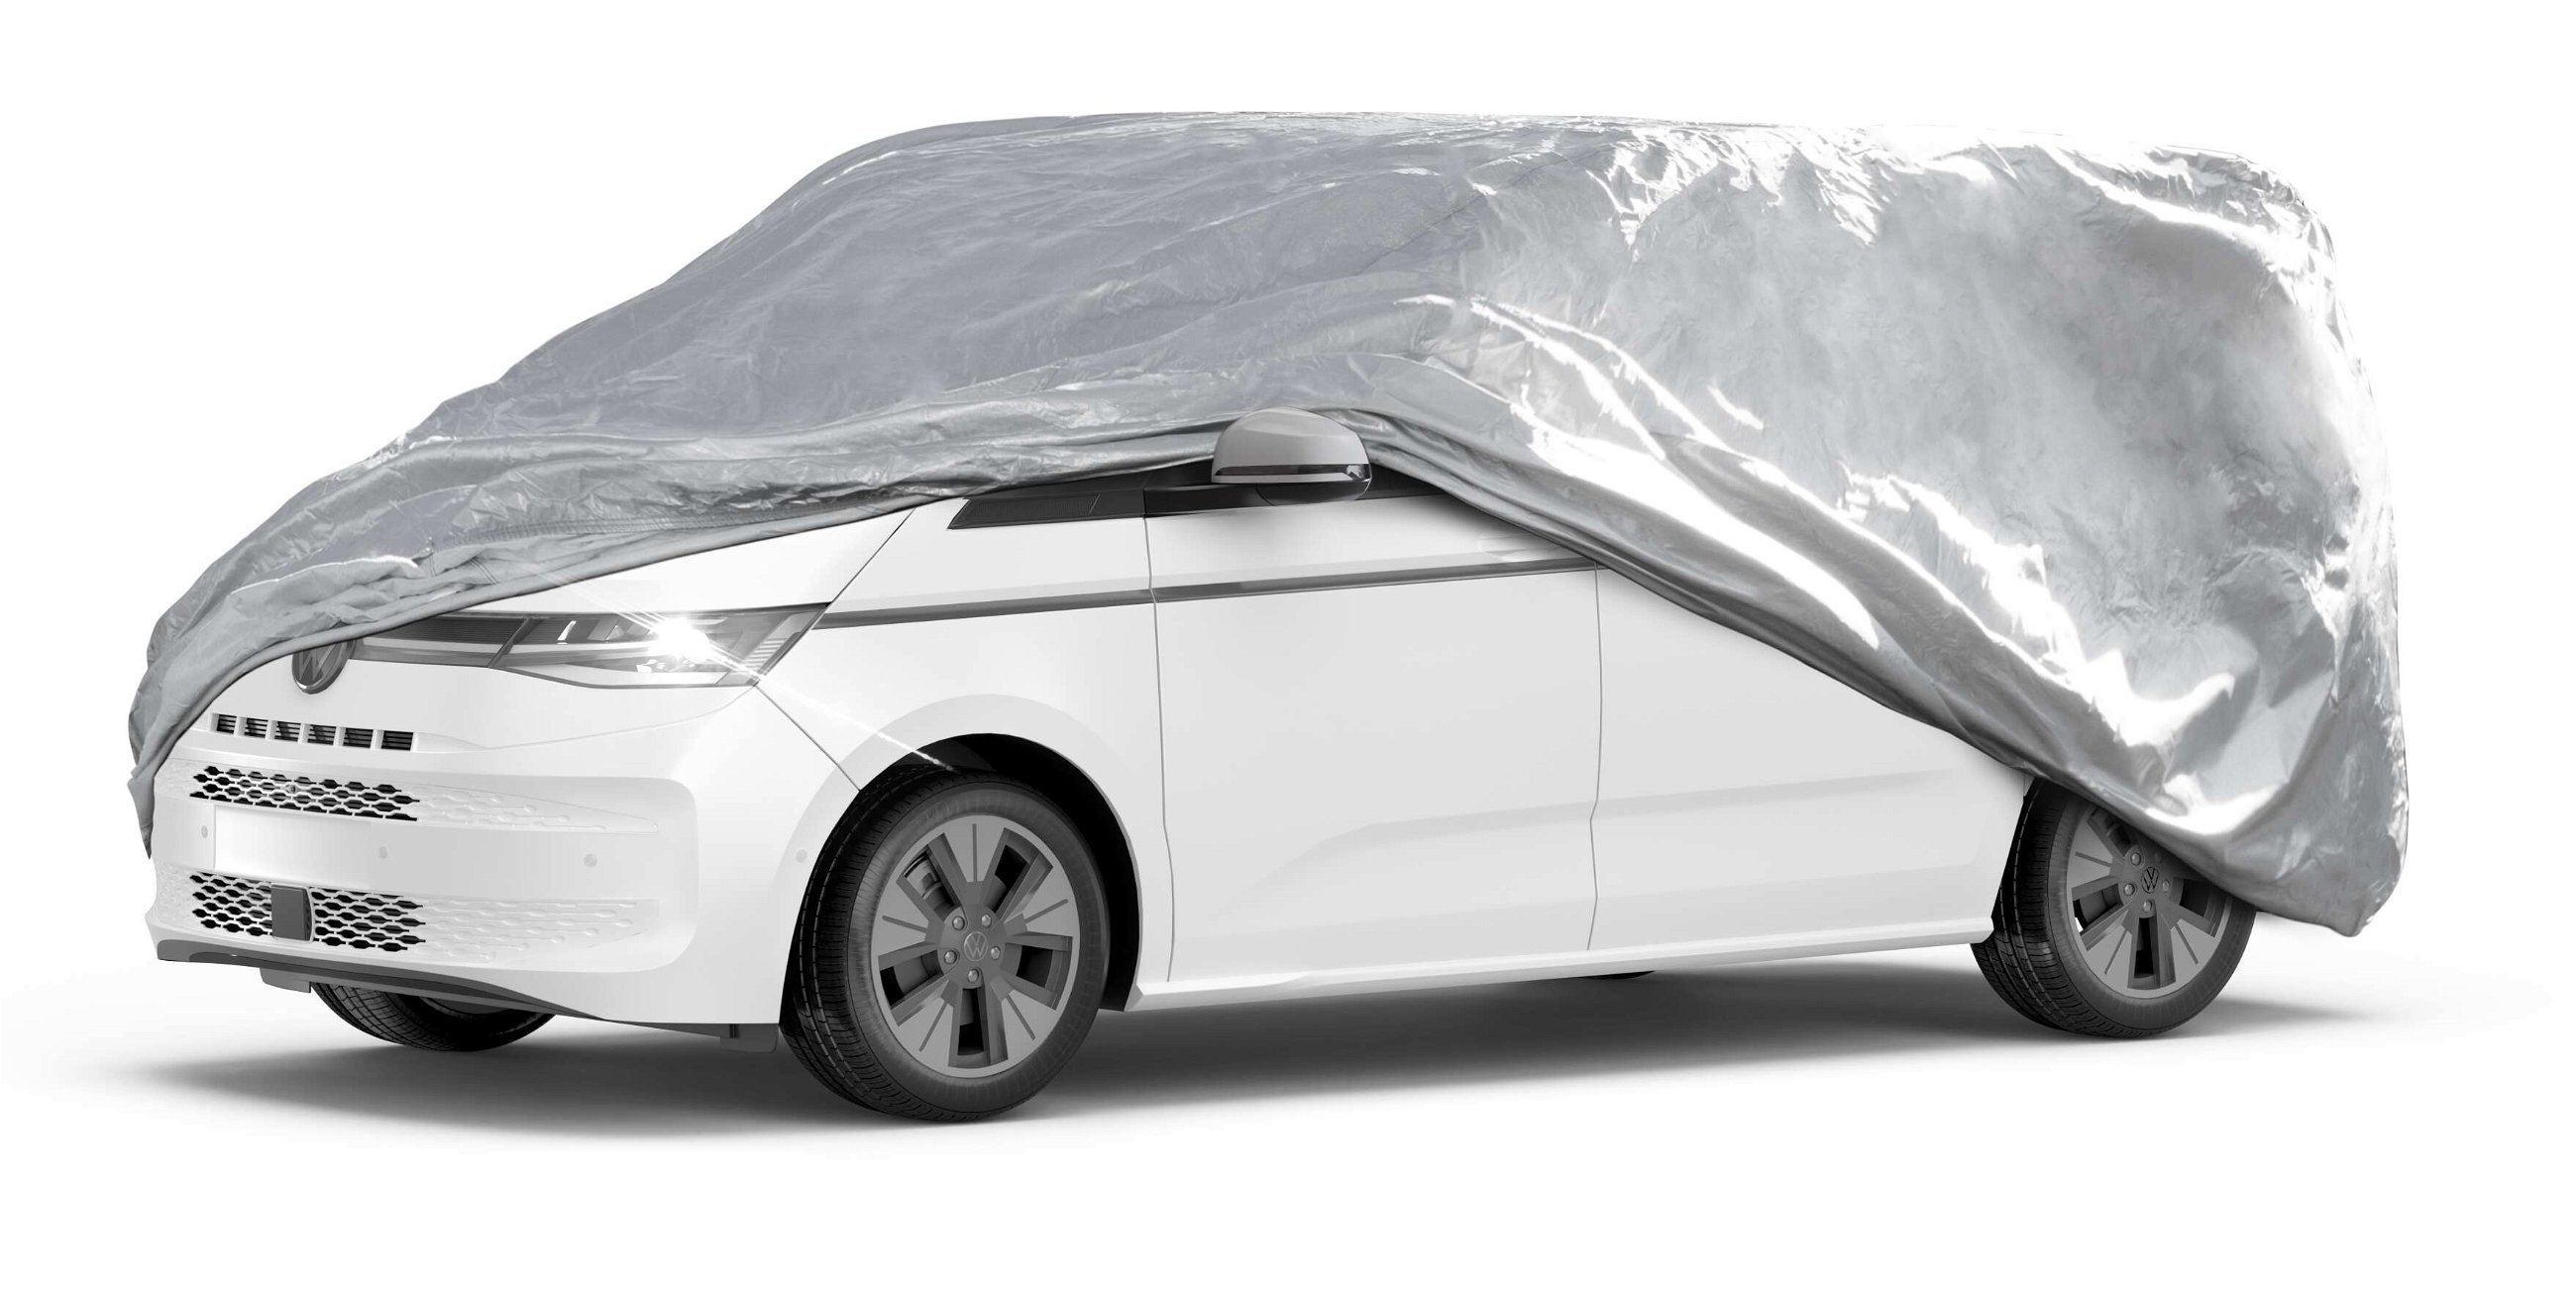 Car cover All Weather Basic, bus car cover size L silver